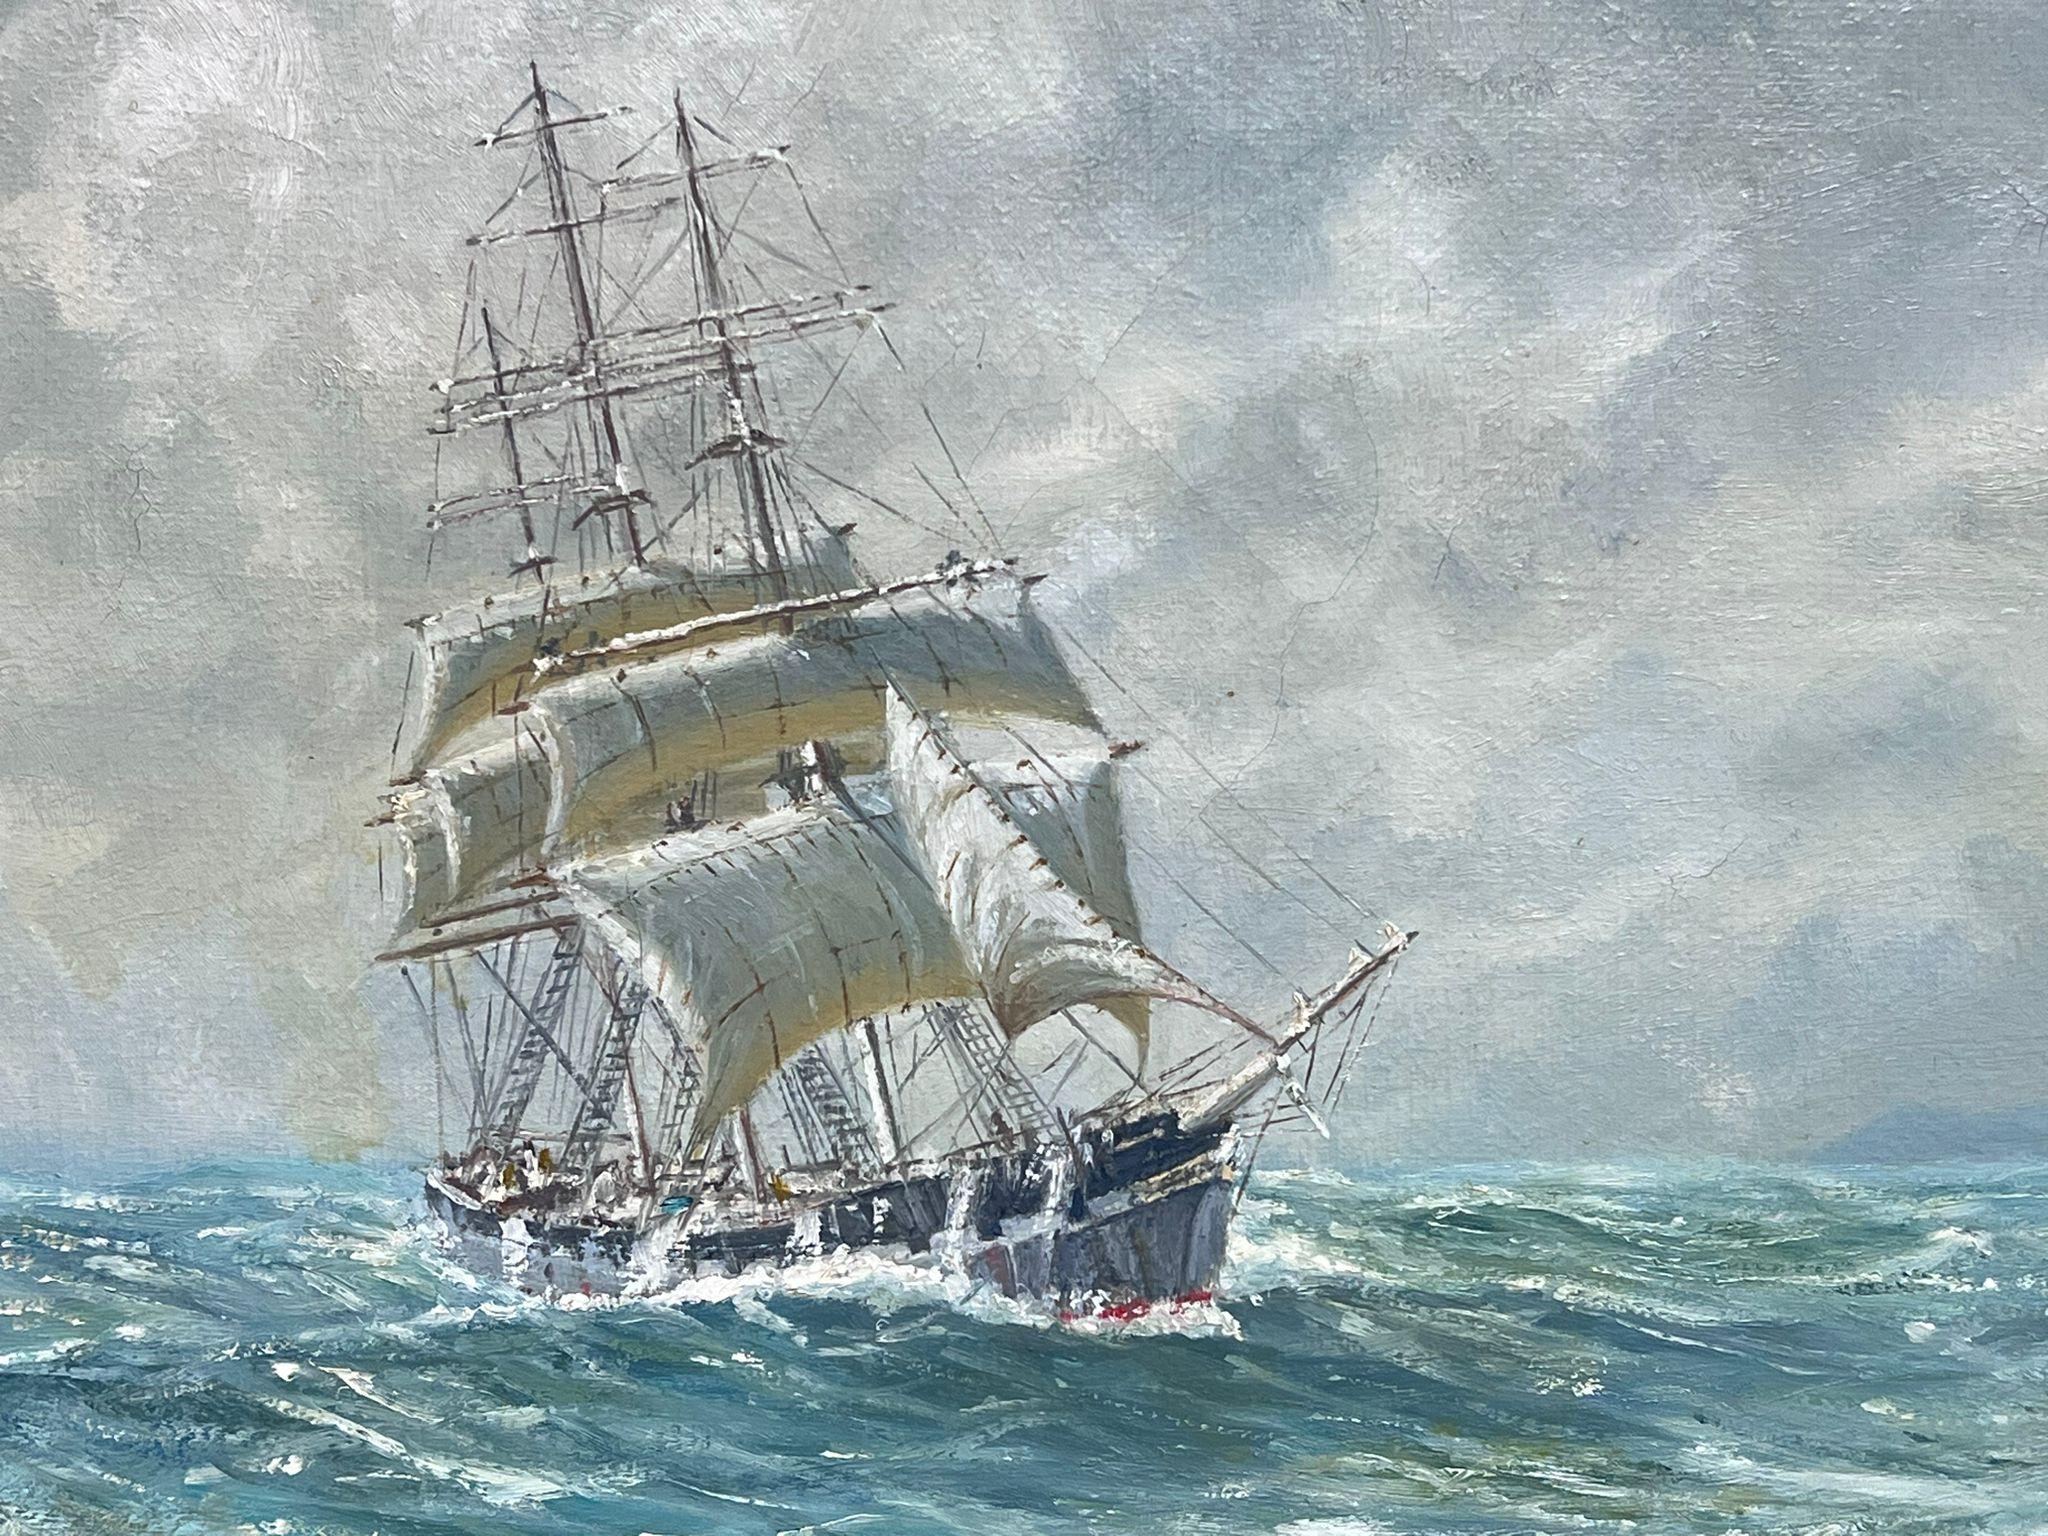 Sailing on the High Seas
English School, mid 20th century
oil on canvas, framed
framed: 19.5 x 25.5 inches
canvas: 14 x 20 inches
provenance: private collection, England
condition: very good and sound condition